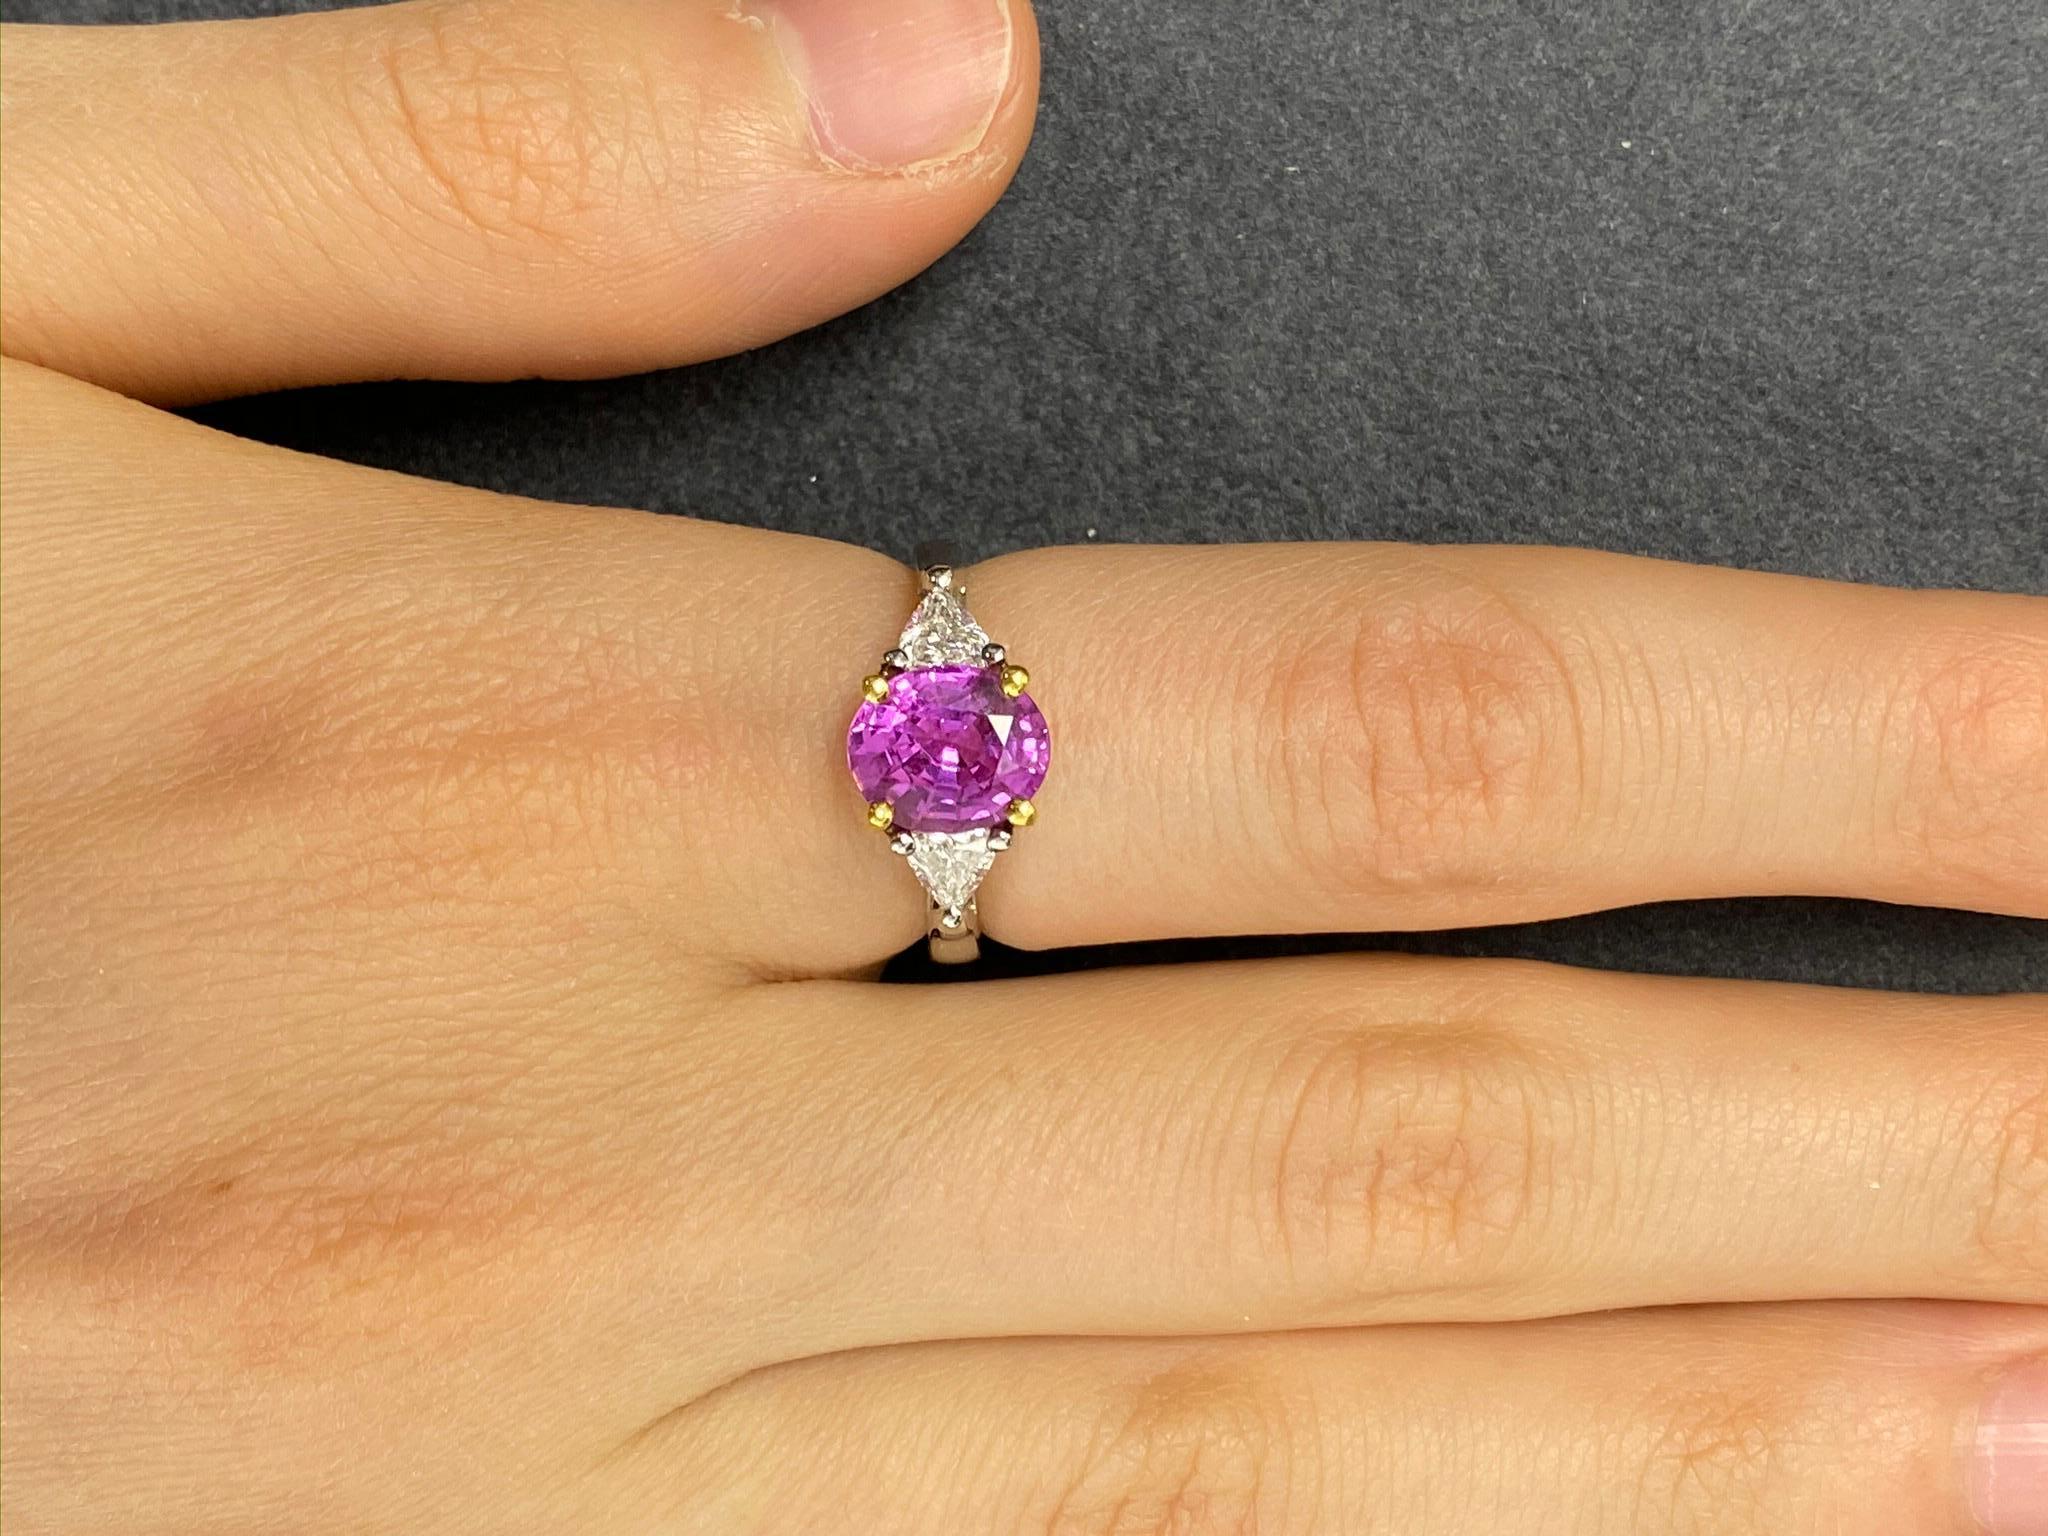 This cocktail ring showcases a stunning 2.56 carat oval hot pink sapphire set in 18 karat yellow gold basket flanked by two .25 carat trillion cut diamonds (total of .5cts) on a platinum setting and shank. Ring size is 6 1/4.